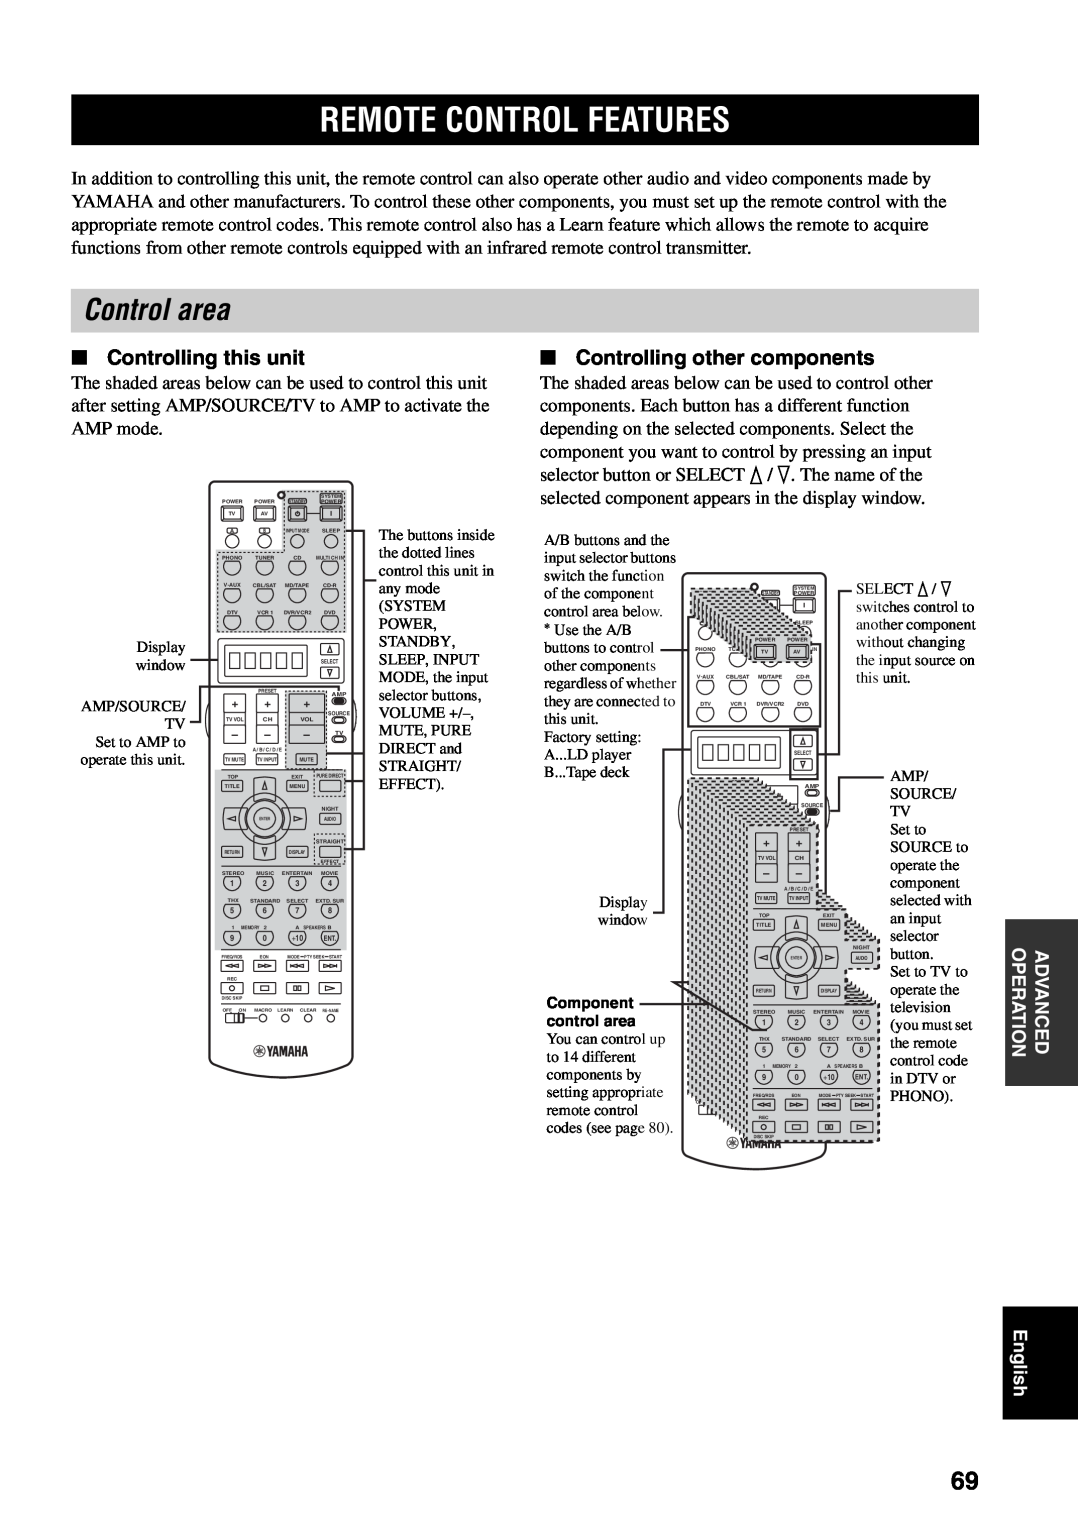 Yamaha RX-V2500 owner manual Remote Control Features, Control area, Controlling this unit, Controlling other components 